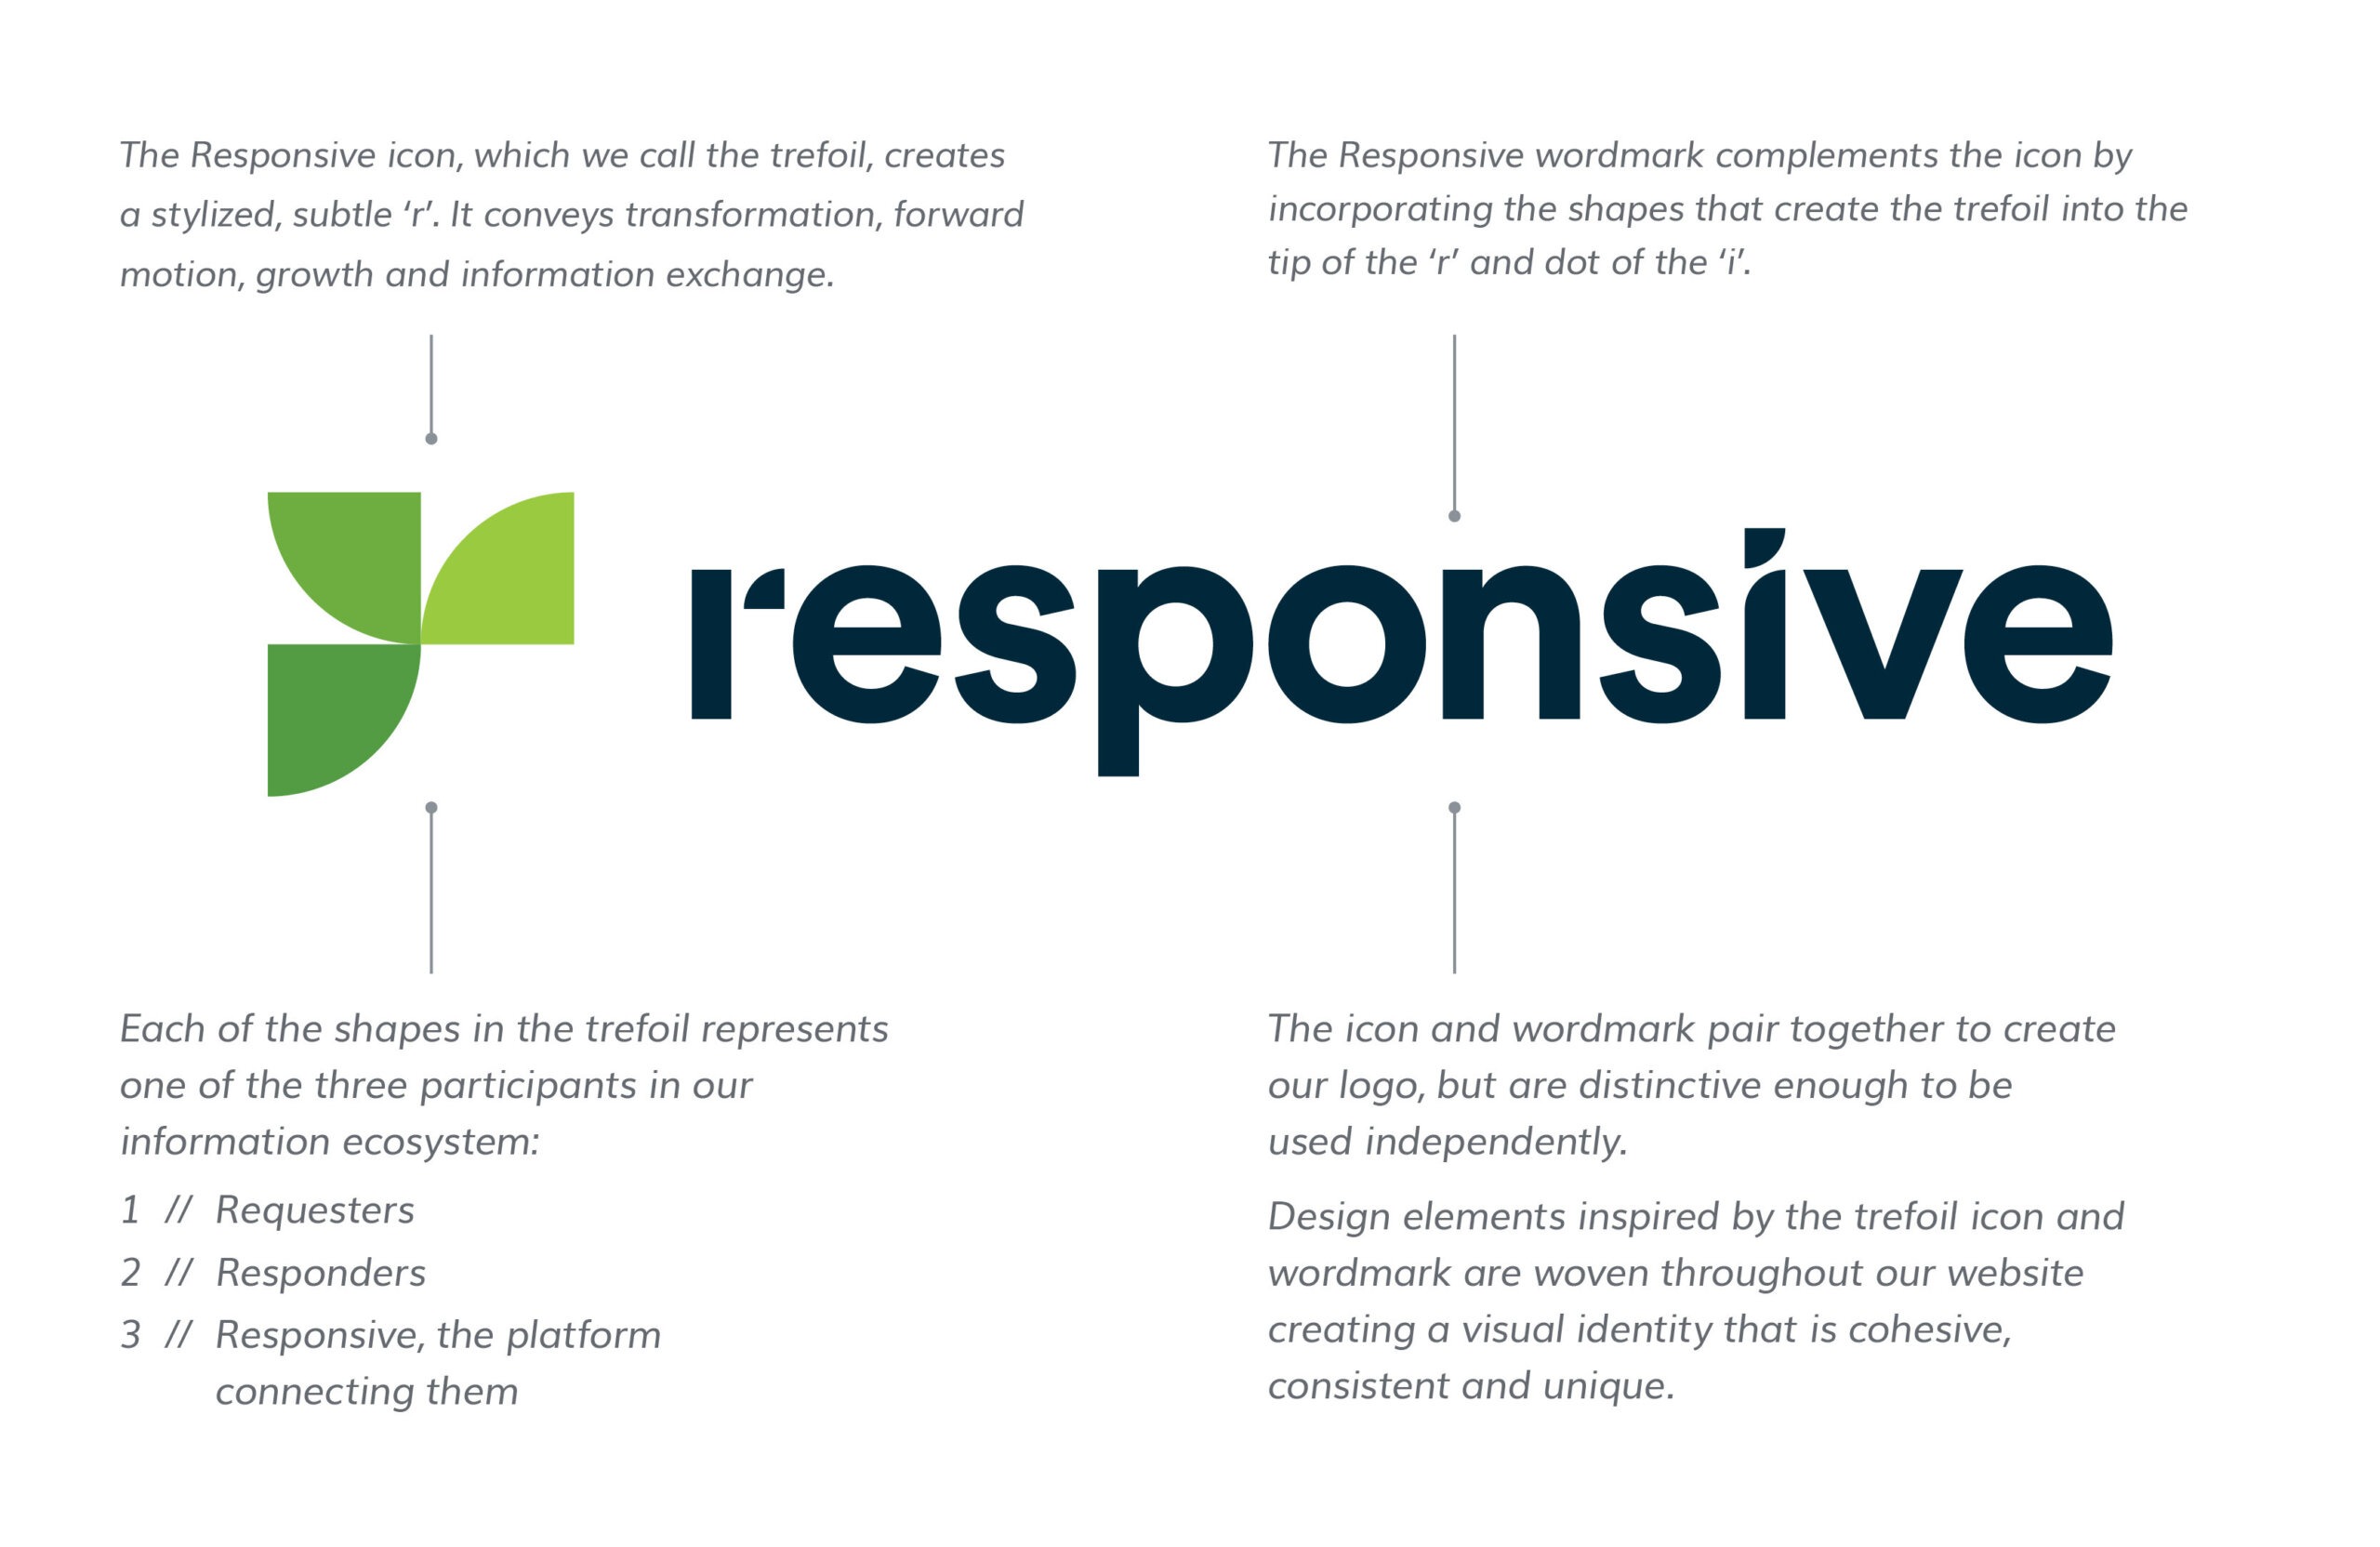 New Responsive Logo and wordmark an evolution from RFPIO